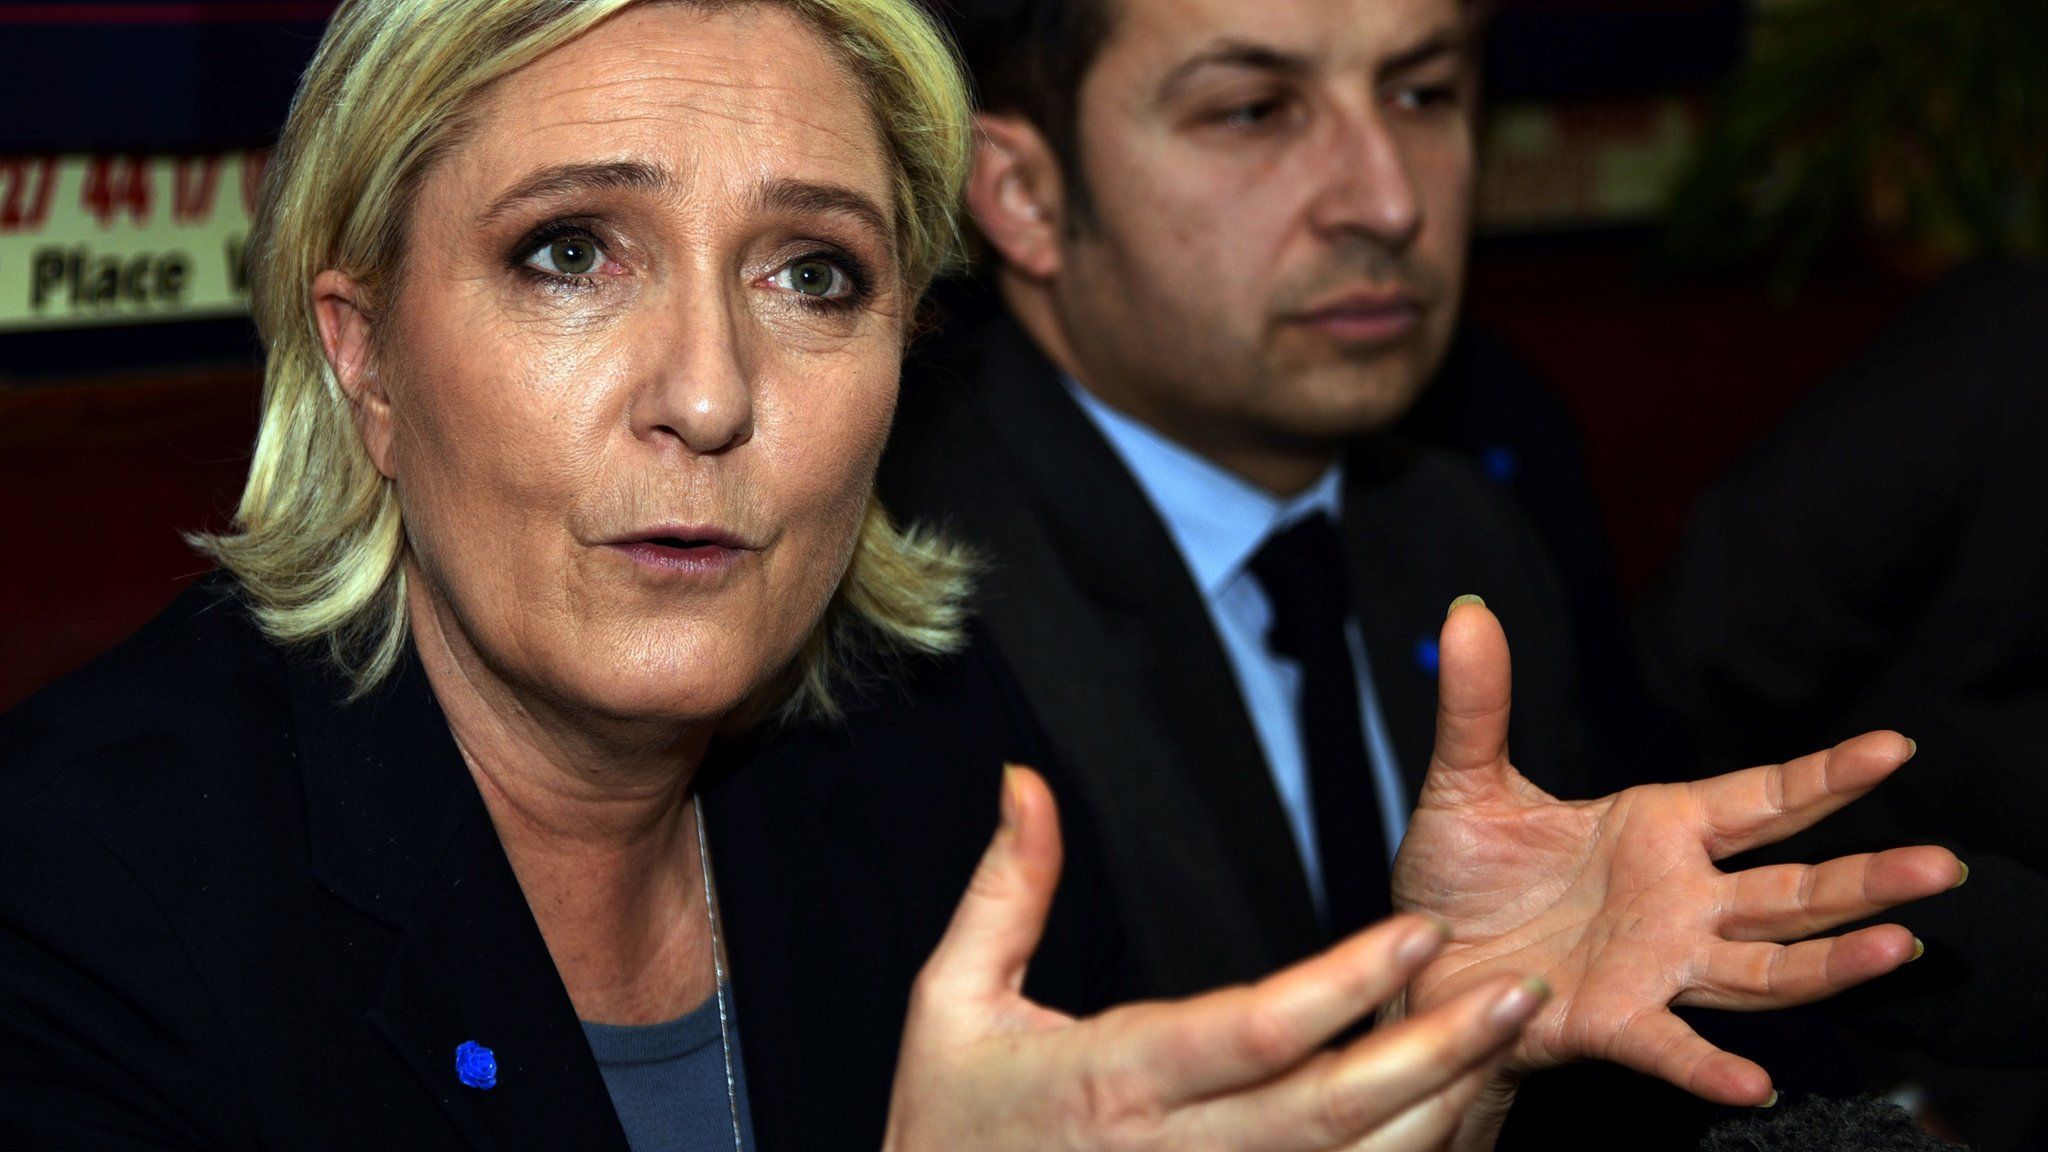 Head of the French far-right National Front party and presidential candidate Marine Le Pen. 27 Jan 2017